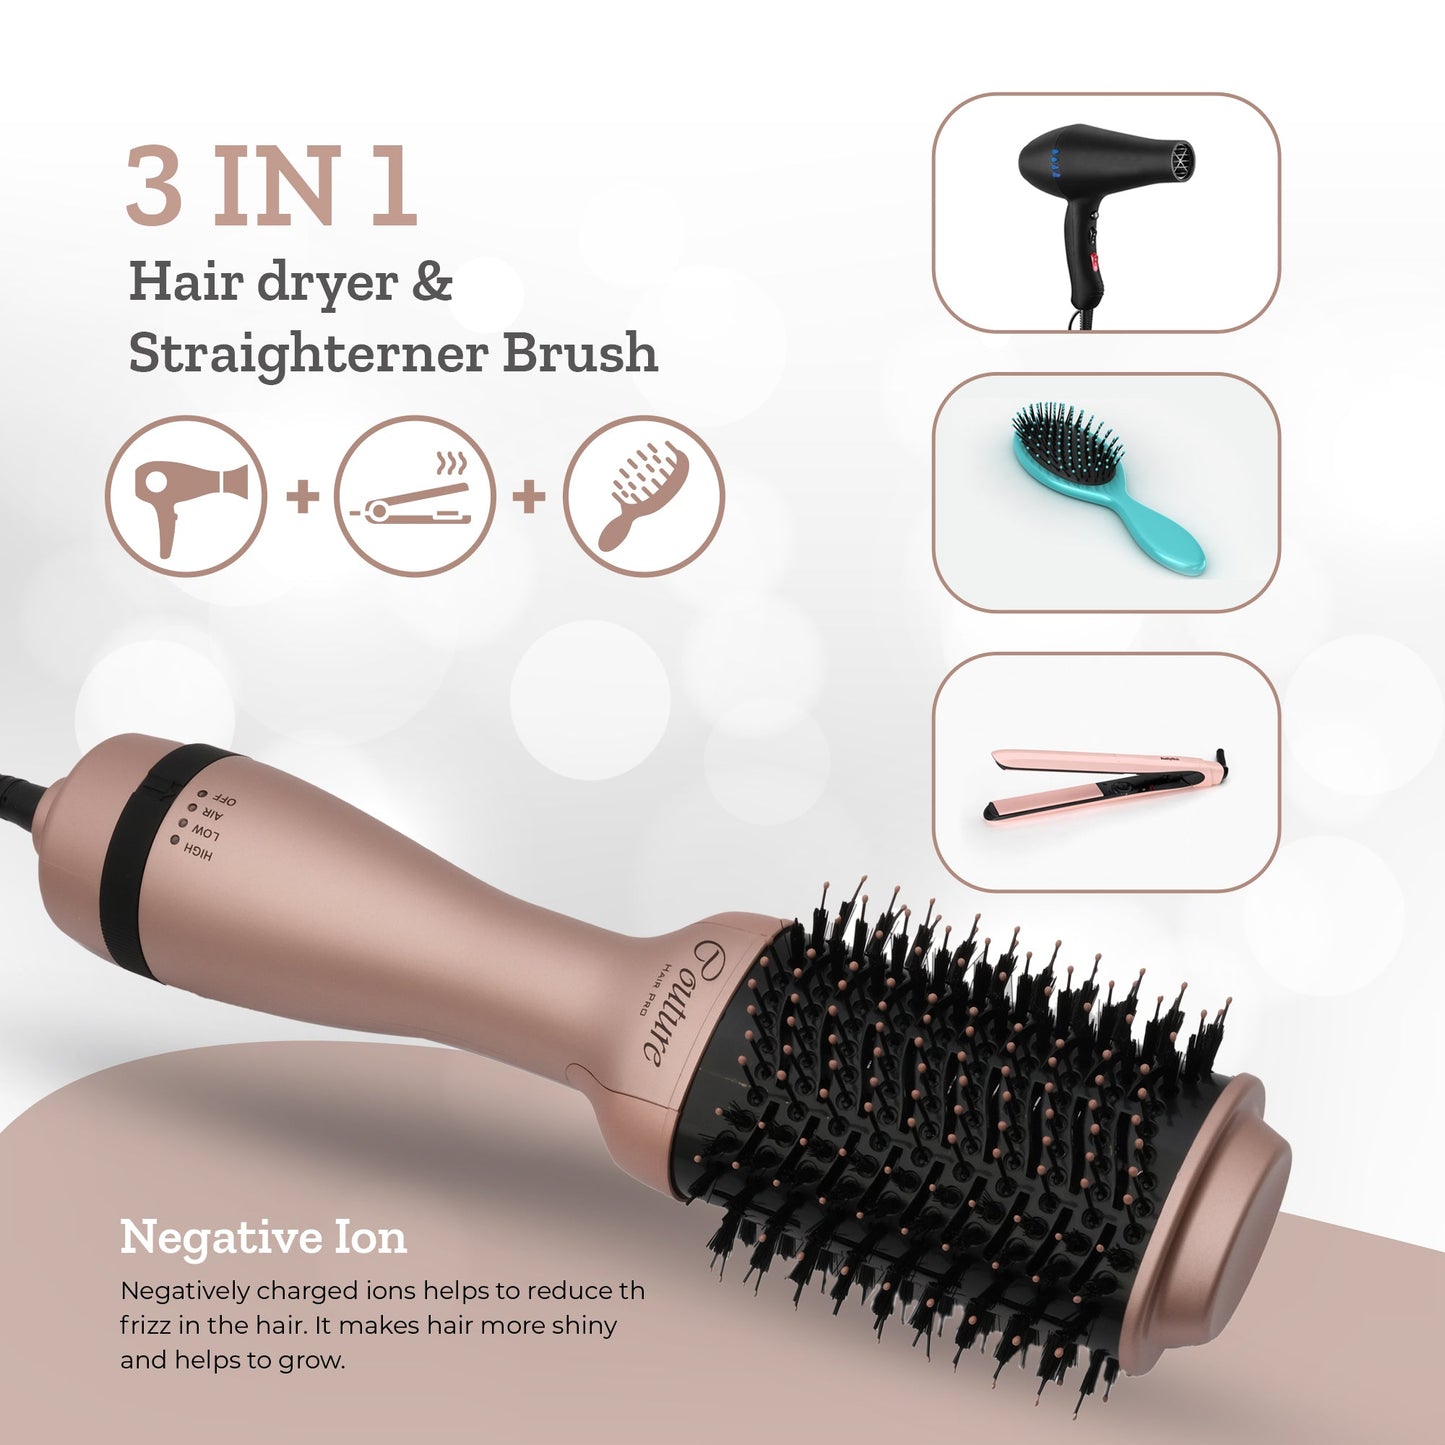 Couture Hair Pro Hot Air Brush - 3 in 1 Hair Straightening Brush, Volumizer & Dryer - Rose Gold - Couture Hair Pro